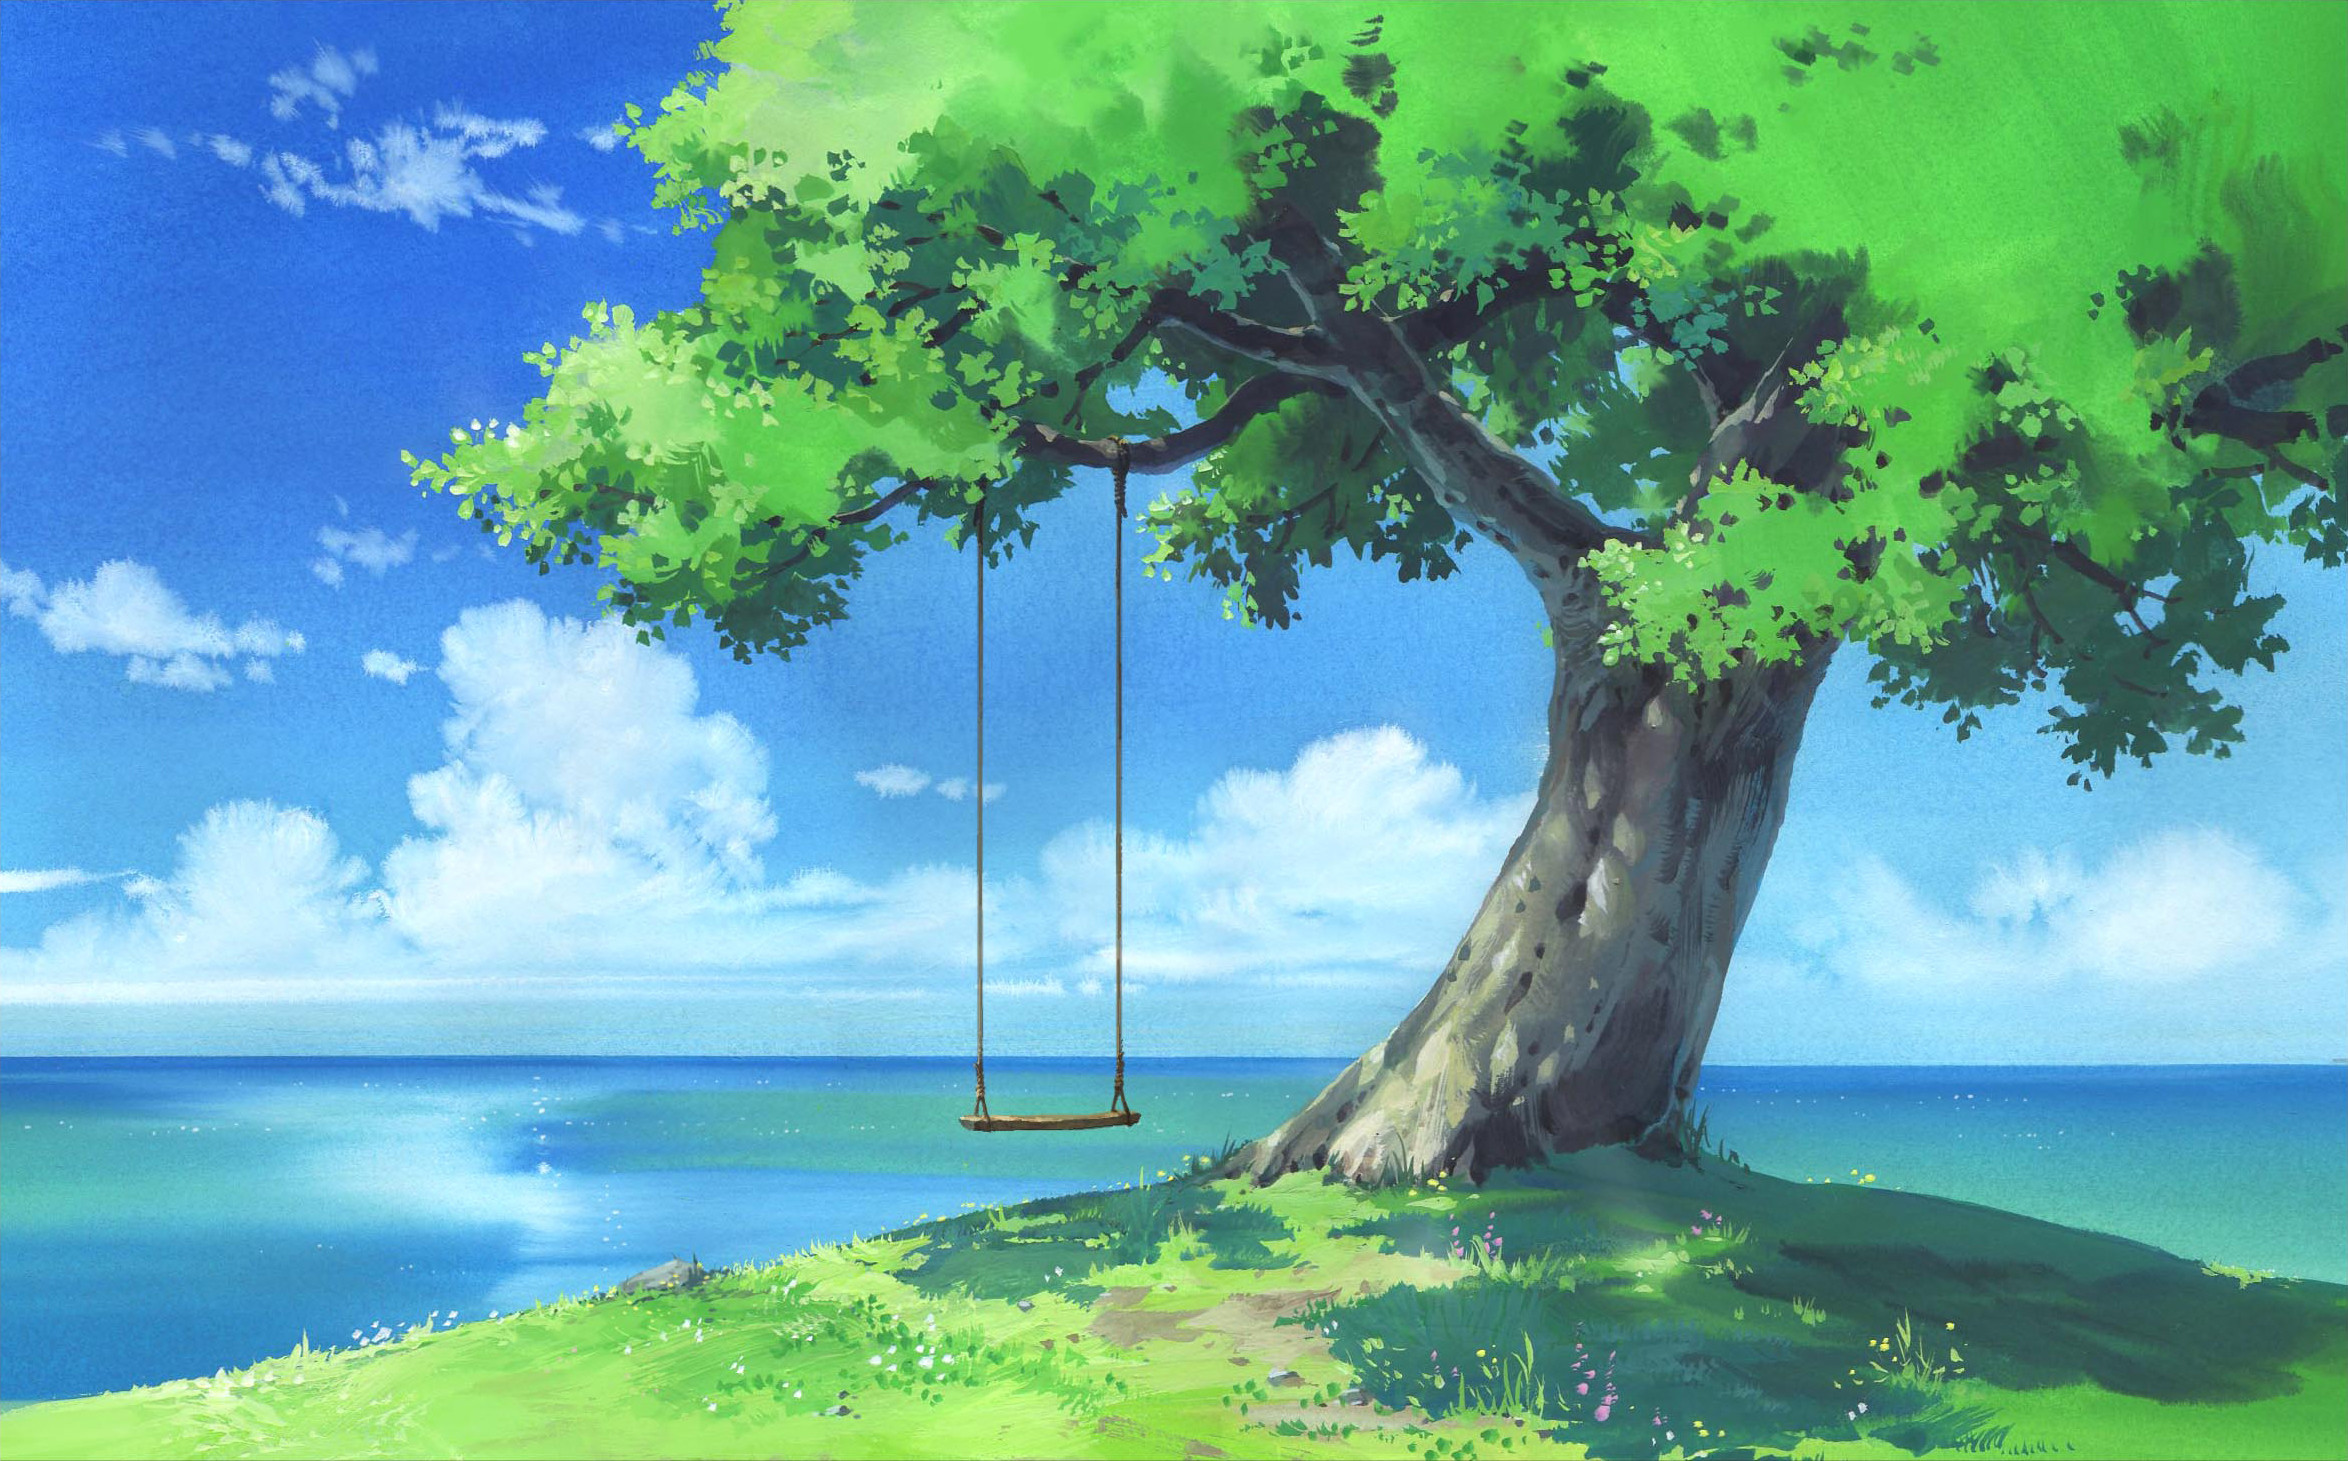 For Hire Wallpaper Attack on Titan inspired Anime background nature  art Environment art Concept landscape price starts at 40usd   rartcommissions